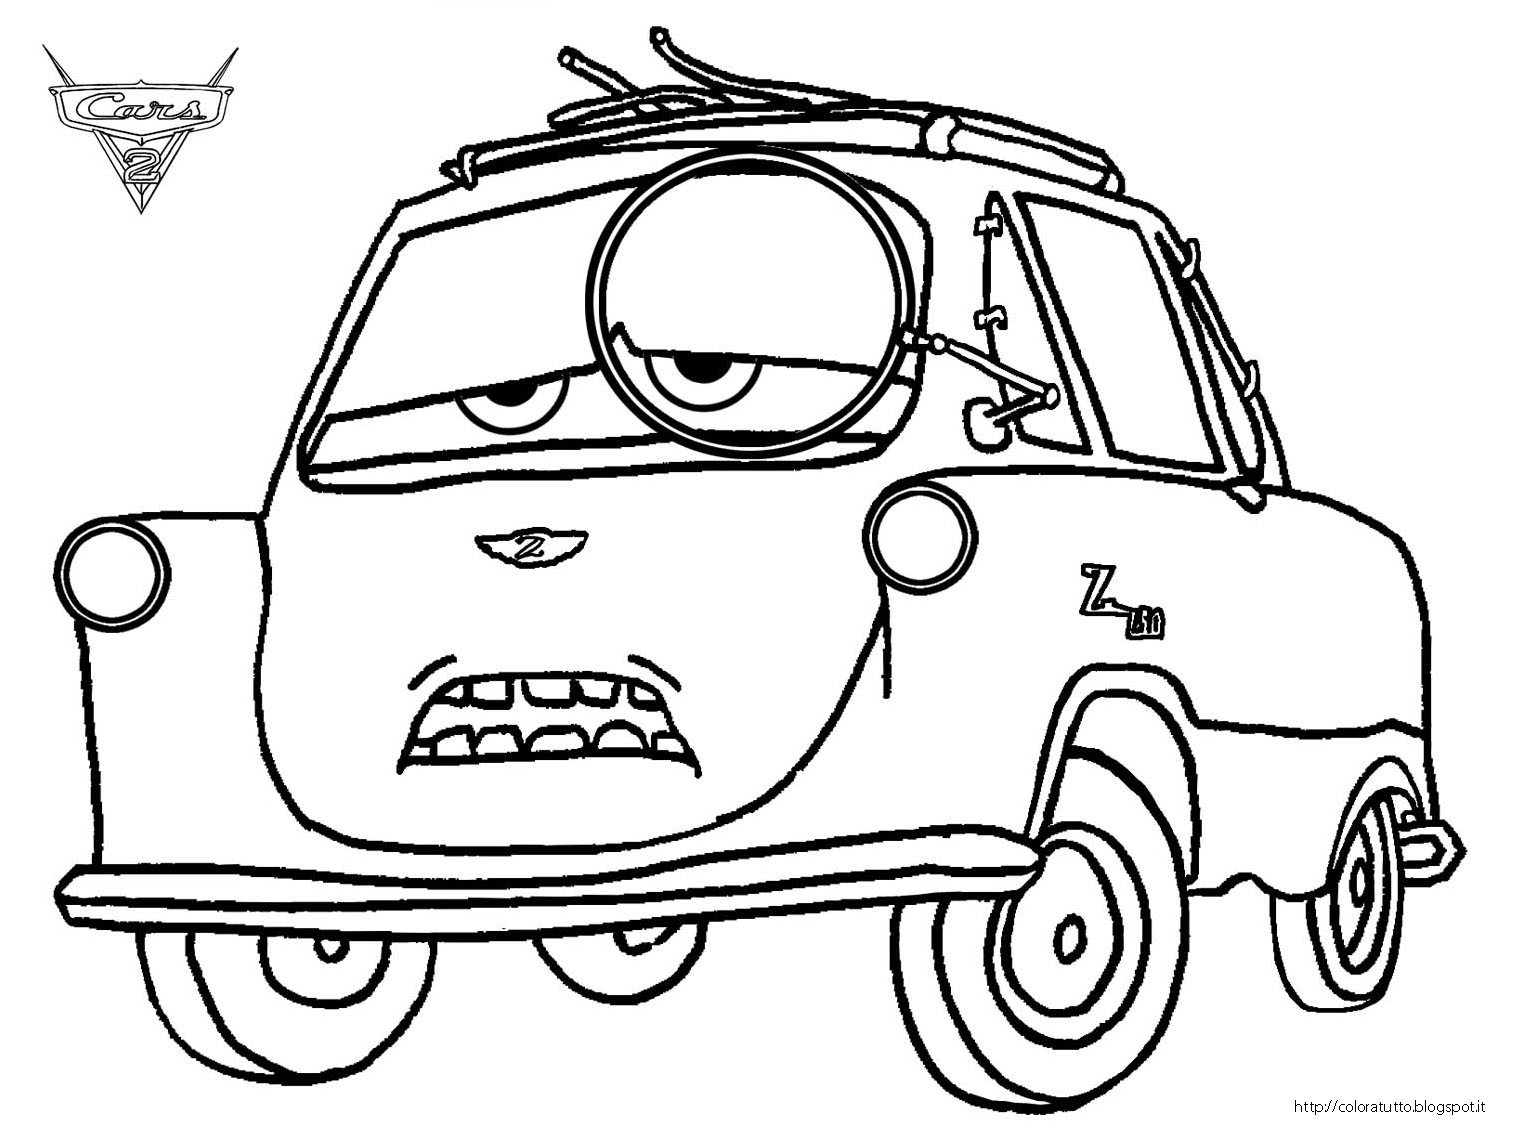 Cars 2 Coloring Pages at GetColorings.com | Free printable colorings ...